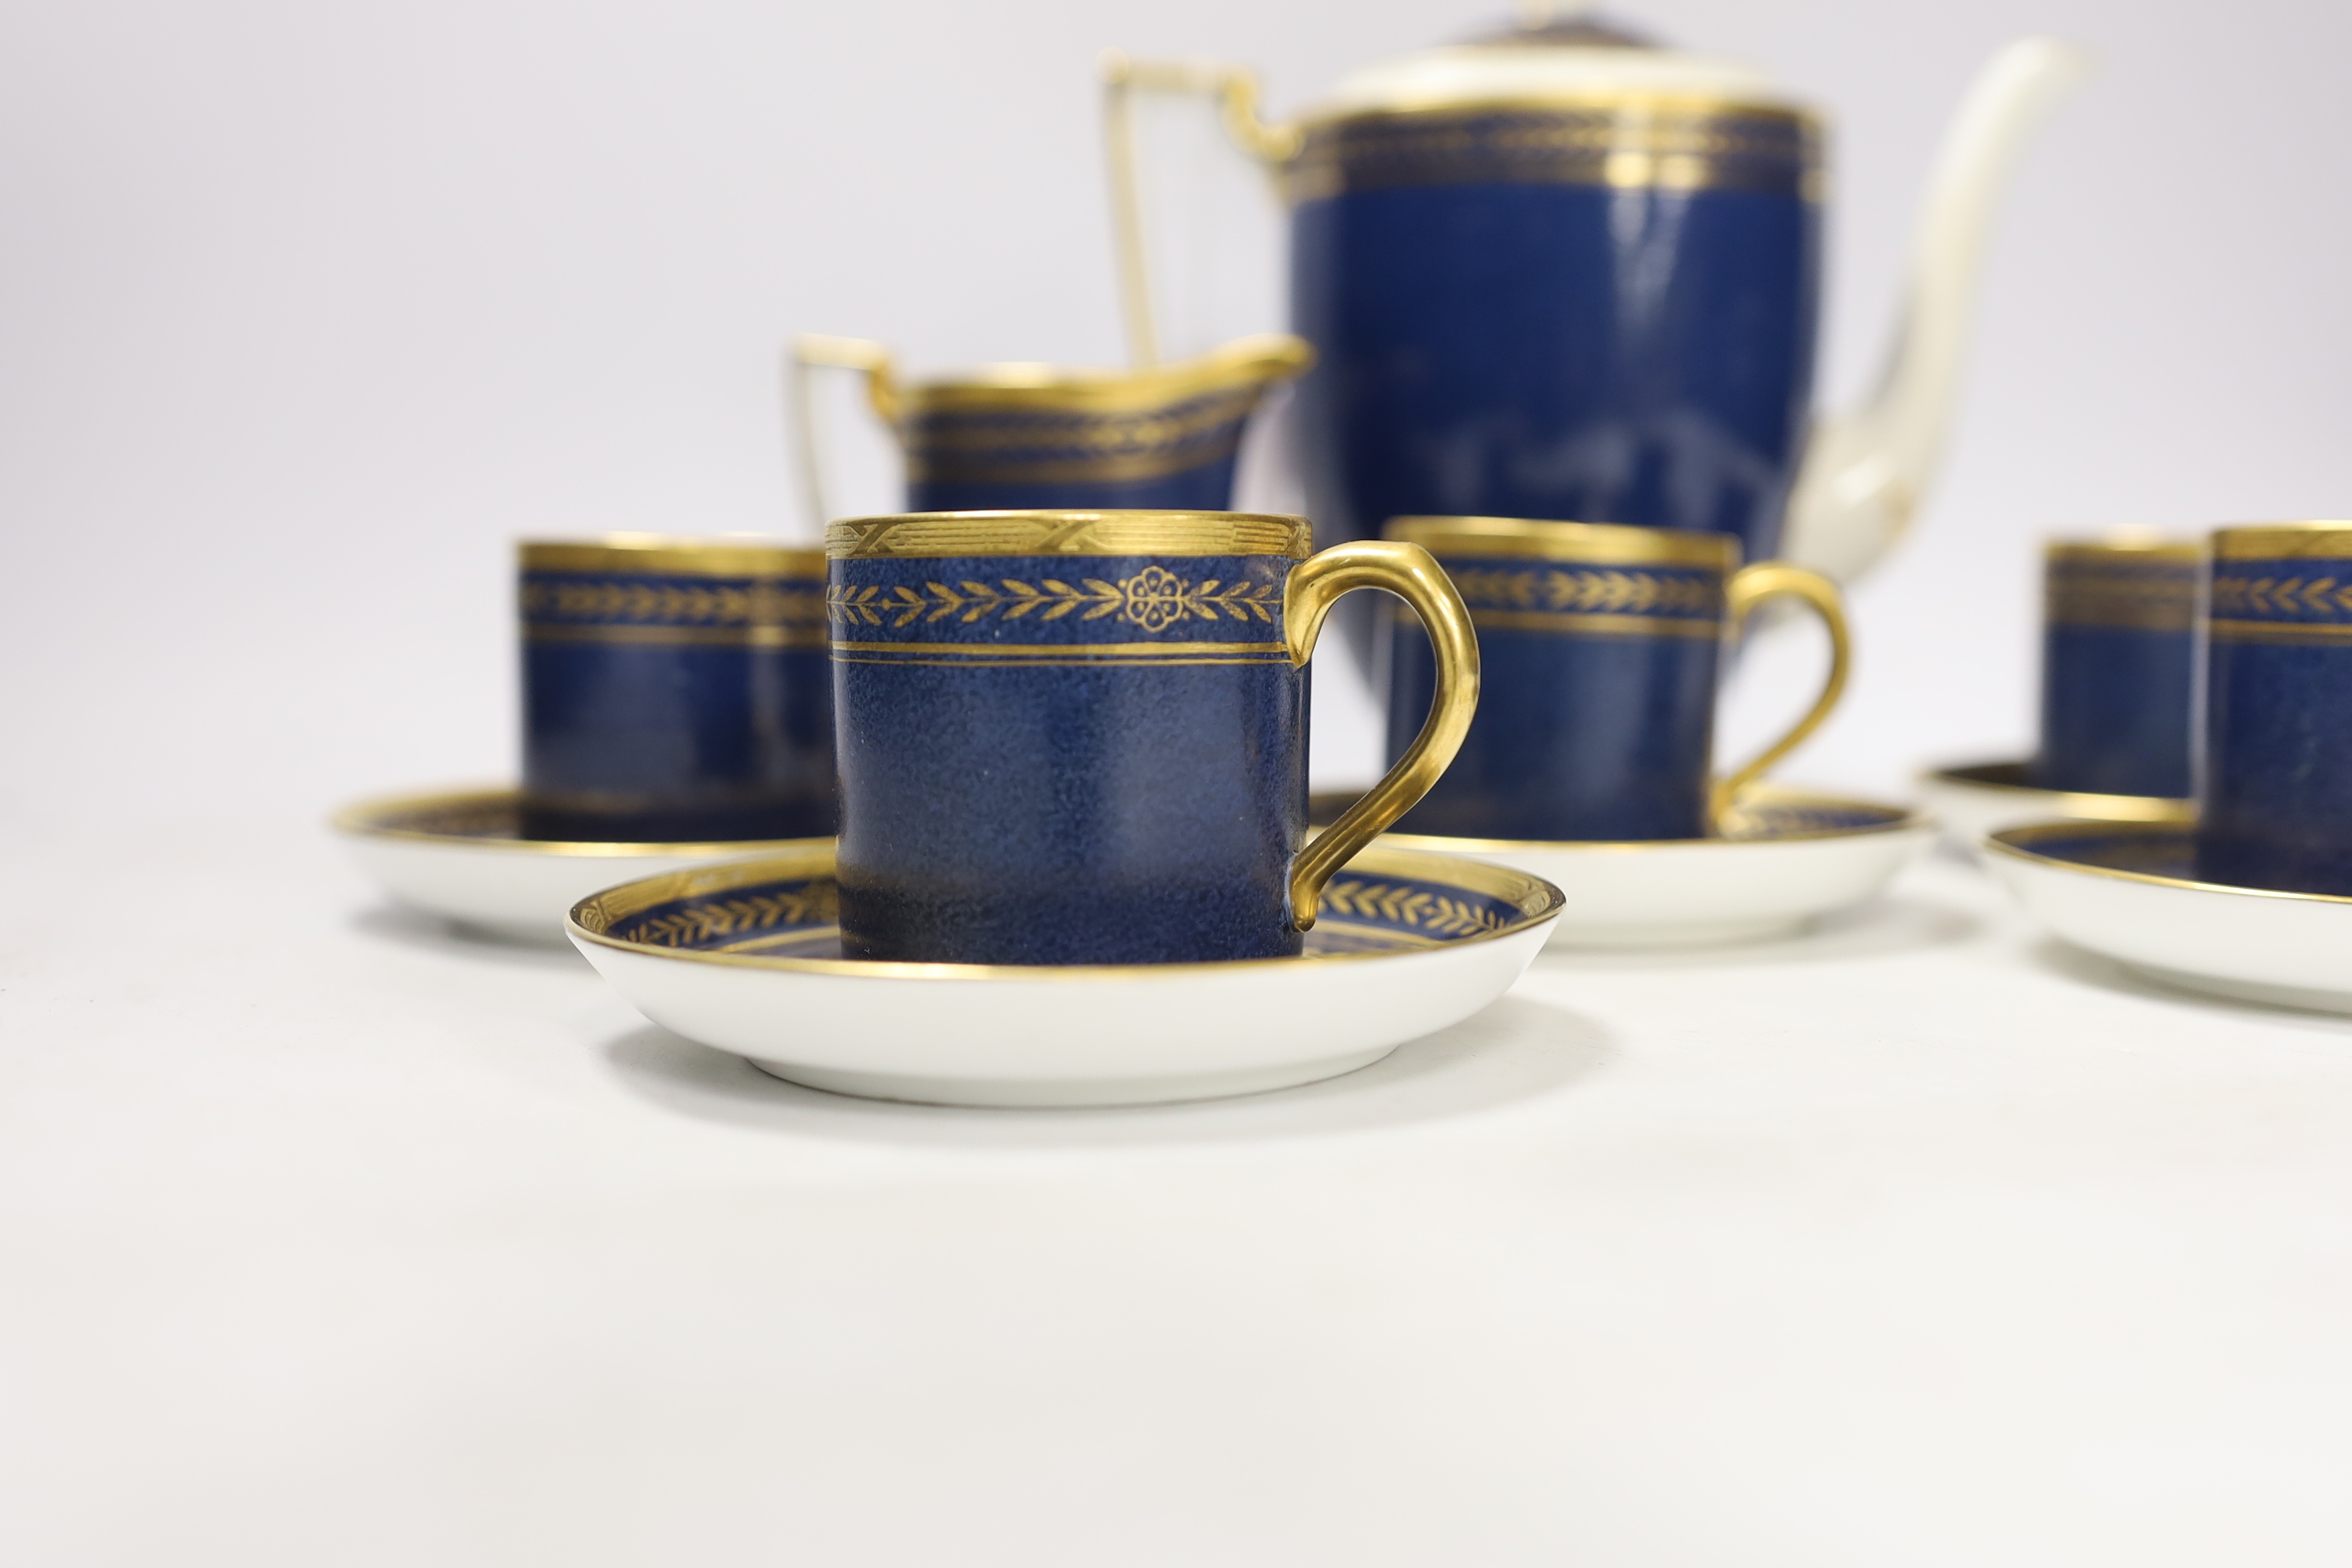 A Mintons powder blue part coffee set comprising six cans and saucers, coffee pot and milk jug together with a Staffordshire flat back figure group, 20cm wide